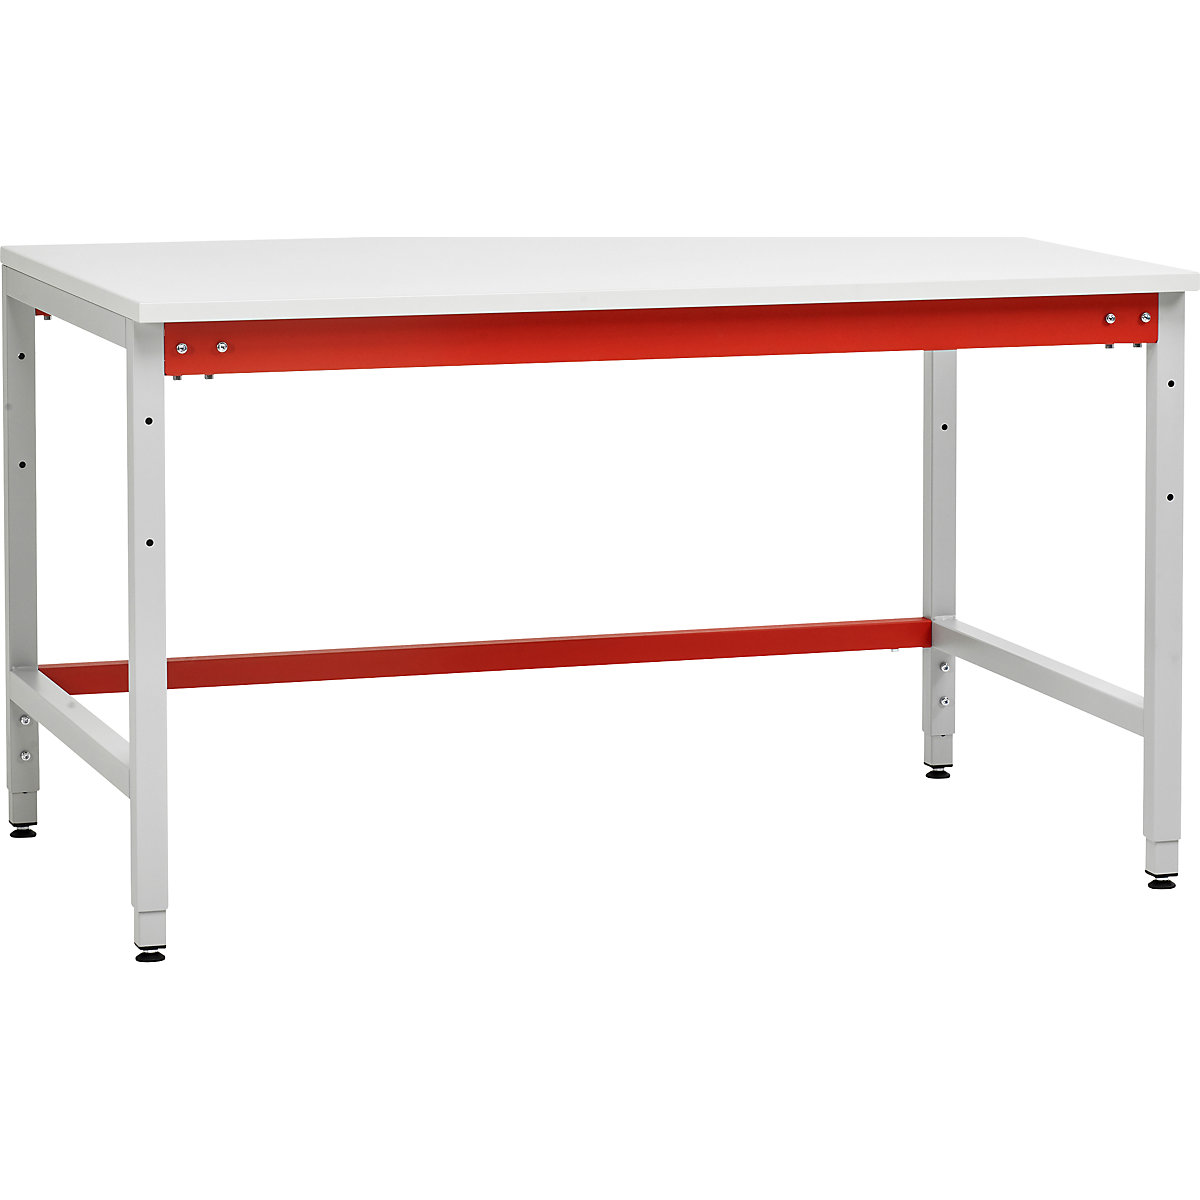 Packing table, standard, HxWxD 780 x 1400 x 900 mm-6